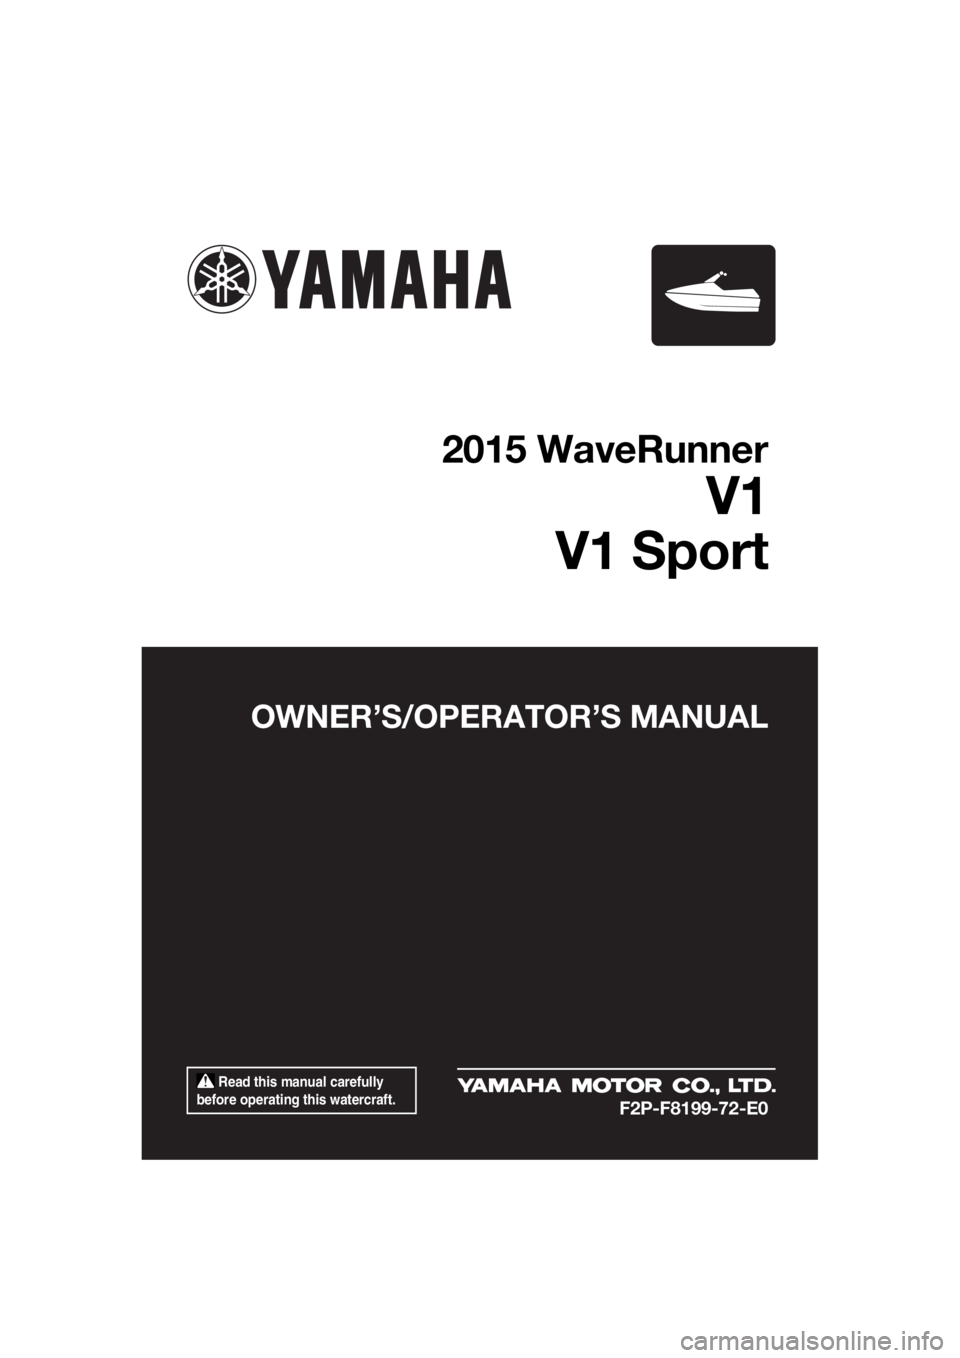 YAMAHA V1 2015  Owners Manual  Read this manual carefully 
before operating this watercraft.
OWNER’S/OPERATOR’S MANUAL
2015 WaveRunner
V1
V1 Sport
F2P-F8199-72-E0
UF2P72E0.book  Page 1  Tuesday, August 26, 2014  10:08 AM 